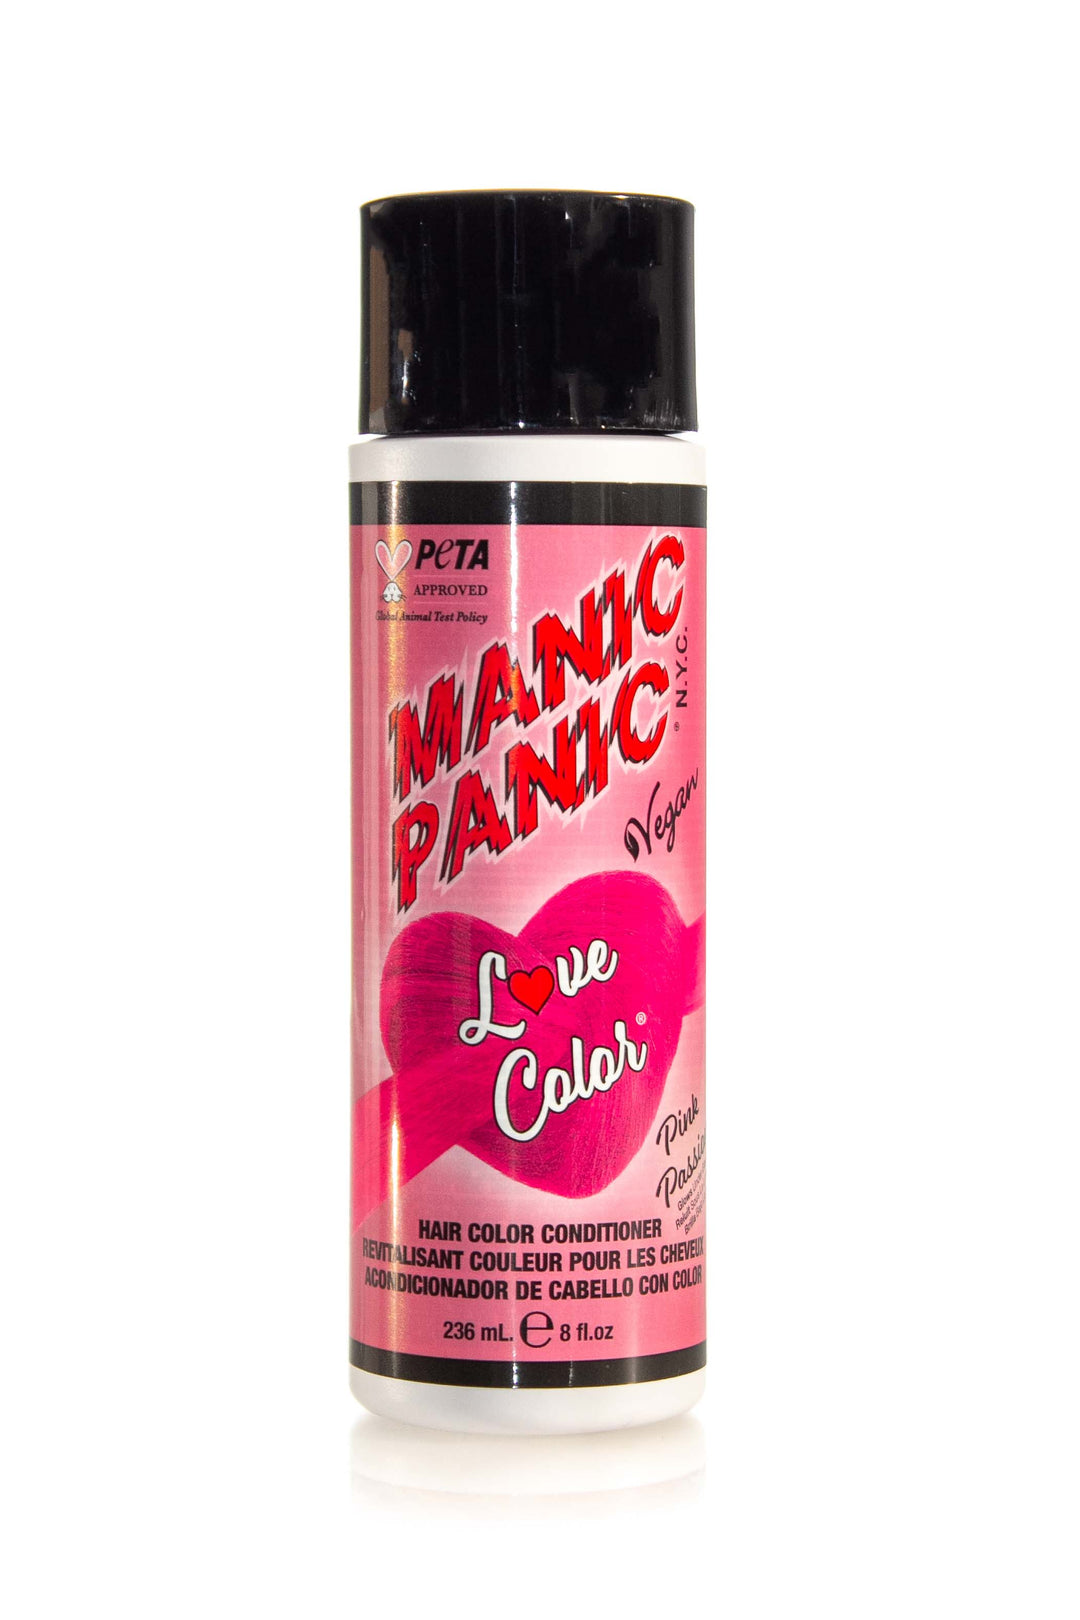 NAK HAIR Manic Panic Hair Color Conditioner 236ml I Various Colours